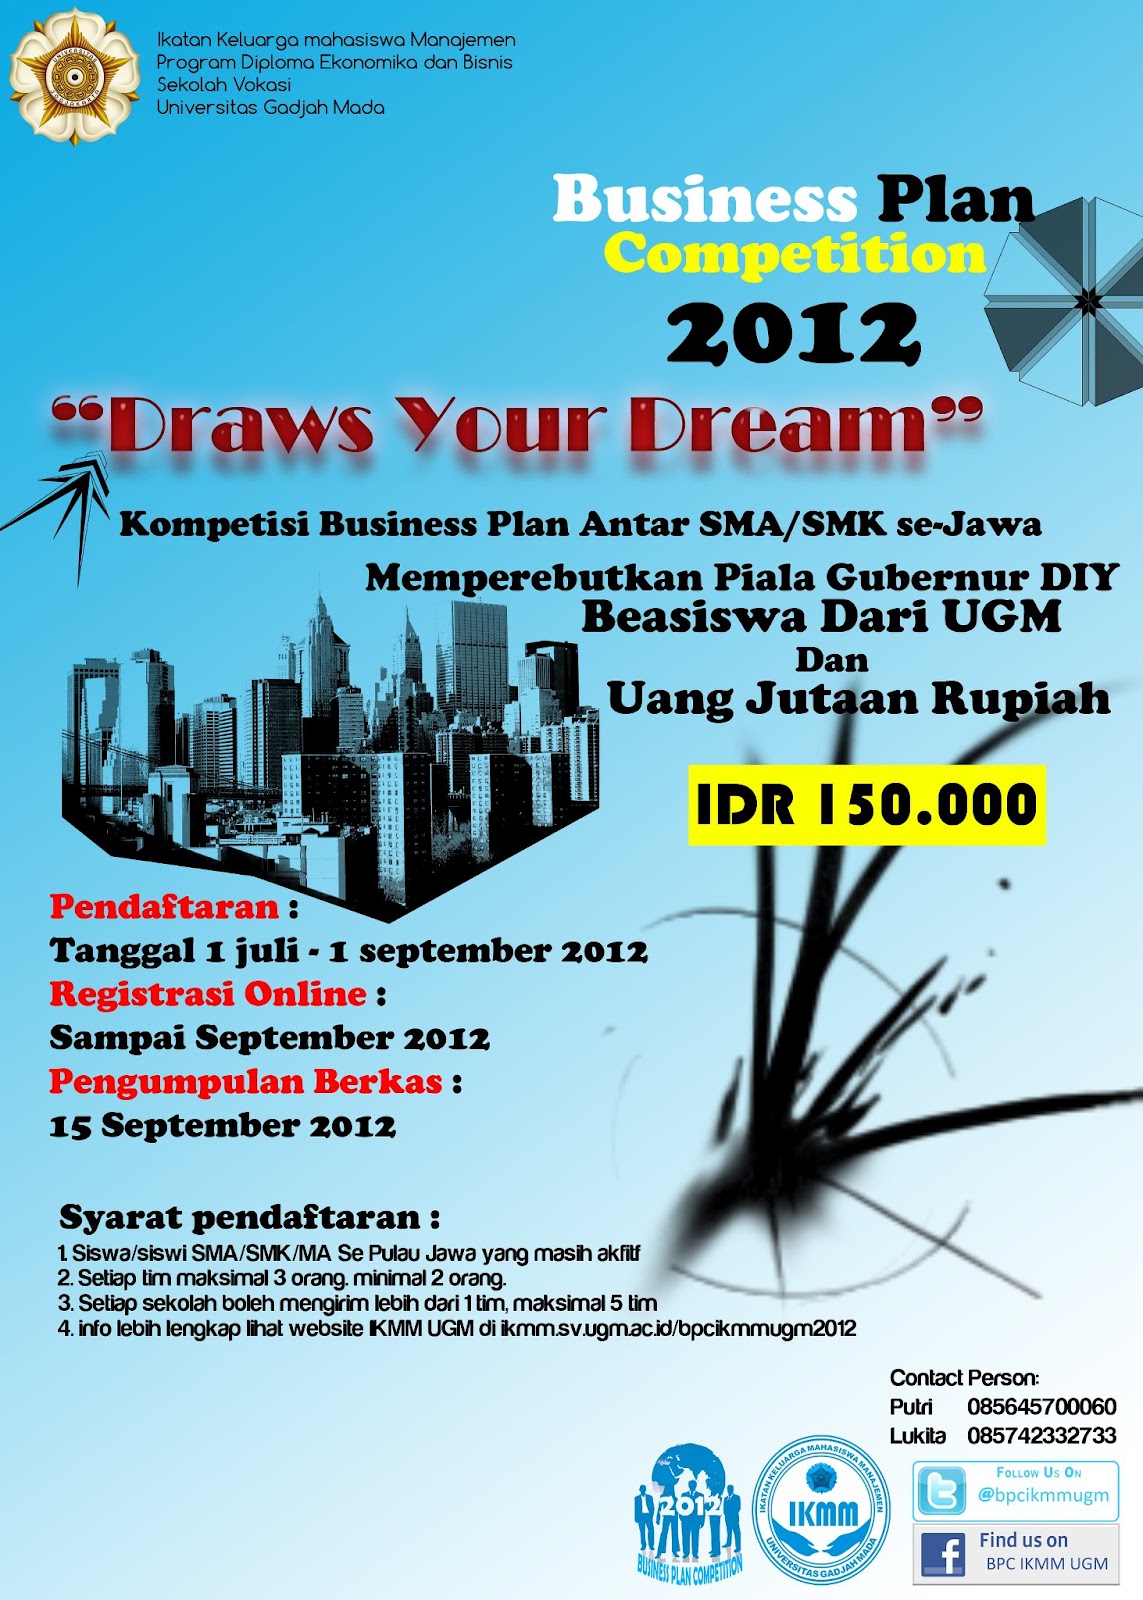 Business Plan Competition 2012